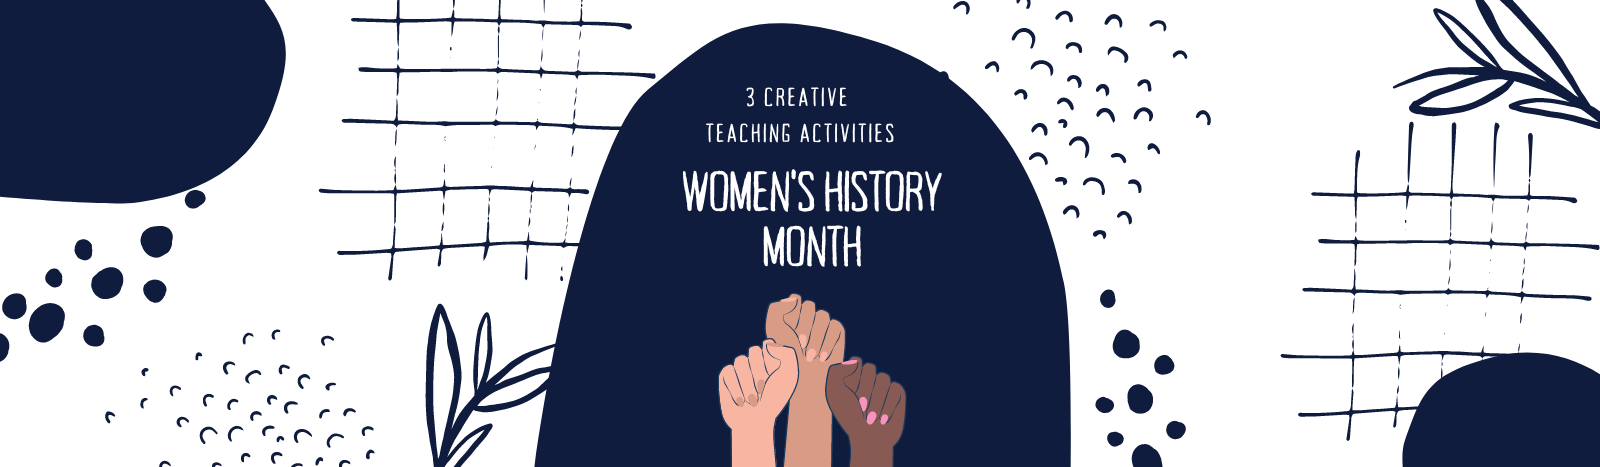 3 Ideas for Celebrating Women's History Month